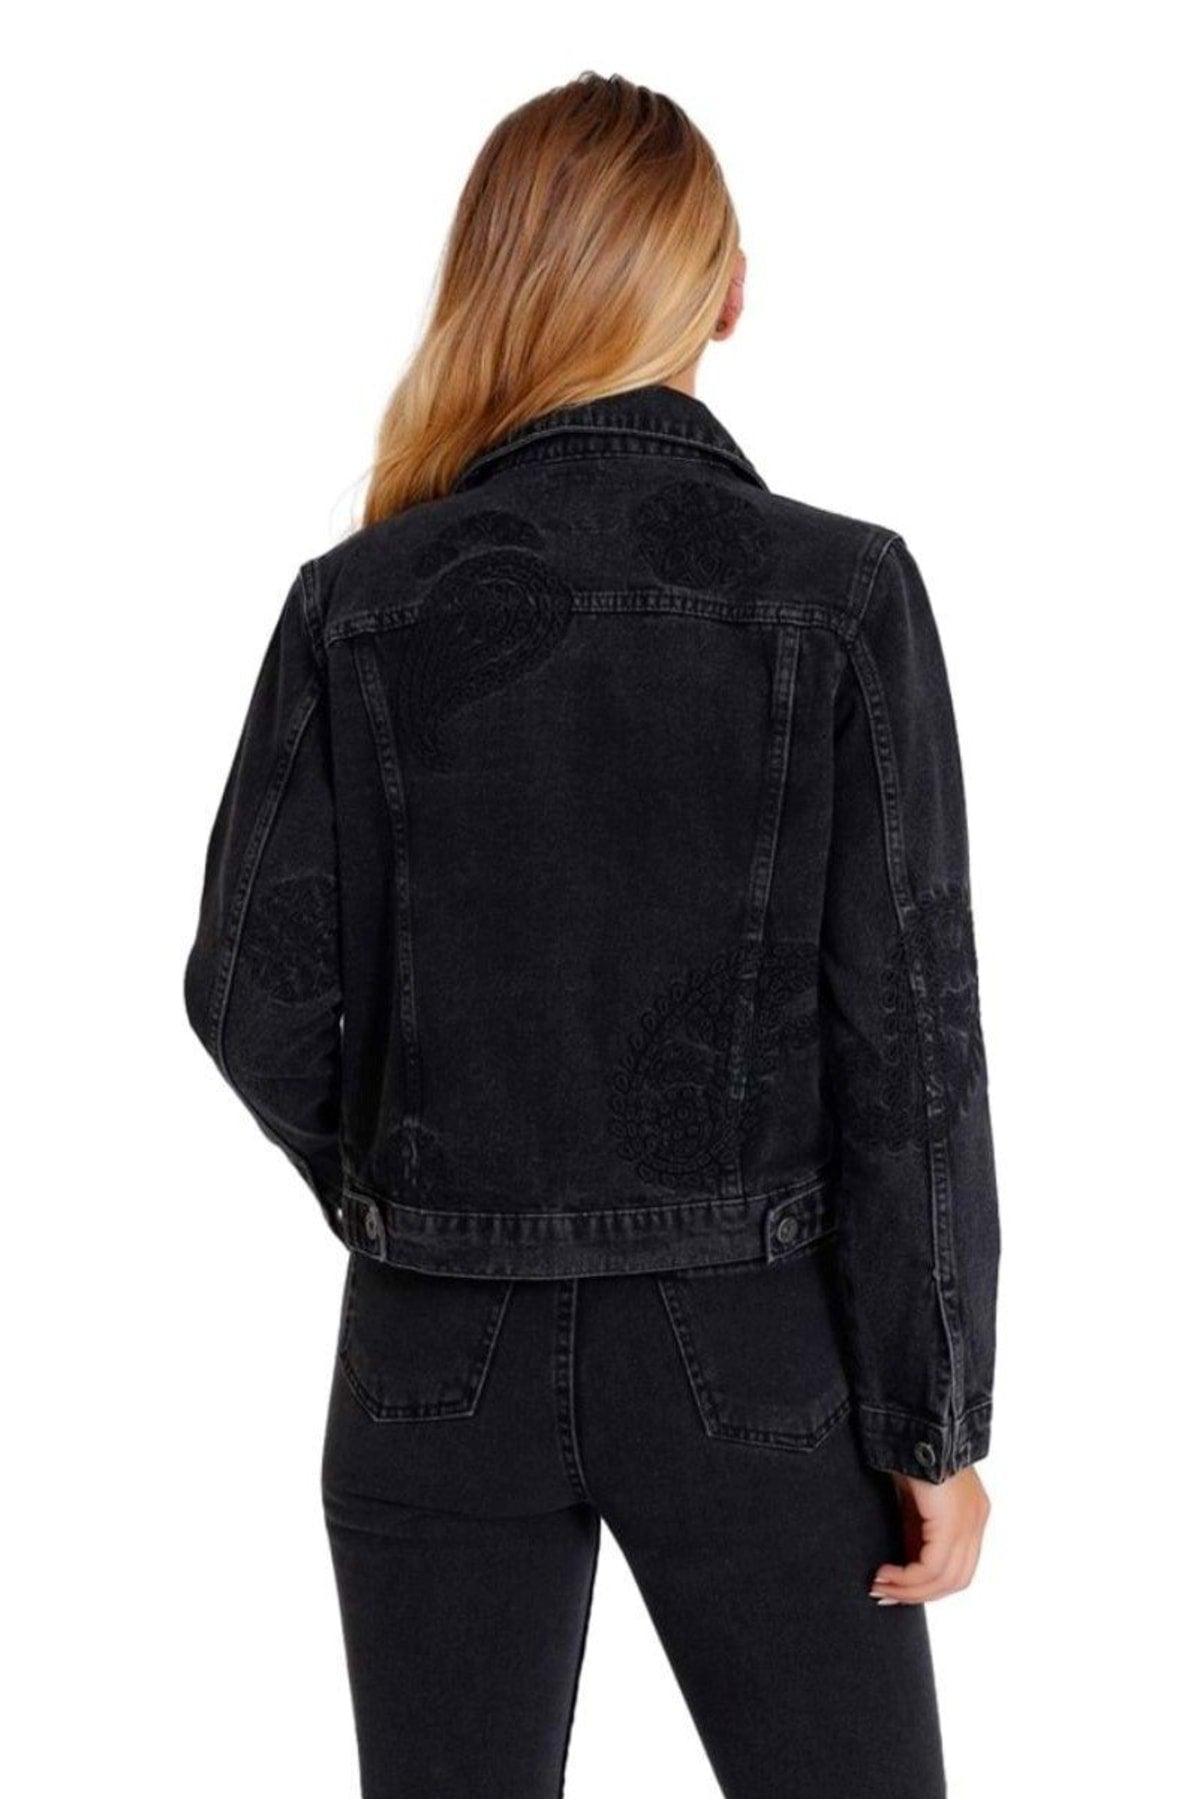 Embroidered Embroidered Short Jeans On The Front And Back Of The Sleeves Women's Jacket Buttoned Four Seasons Classic Denim - Swordslife